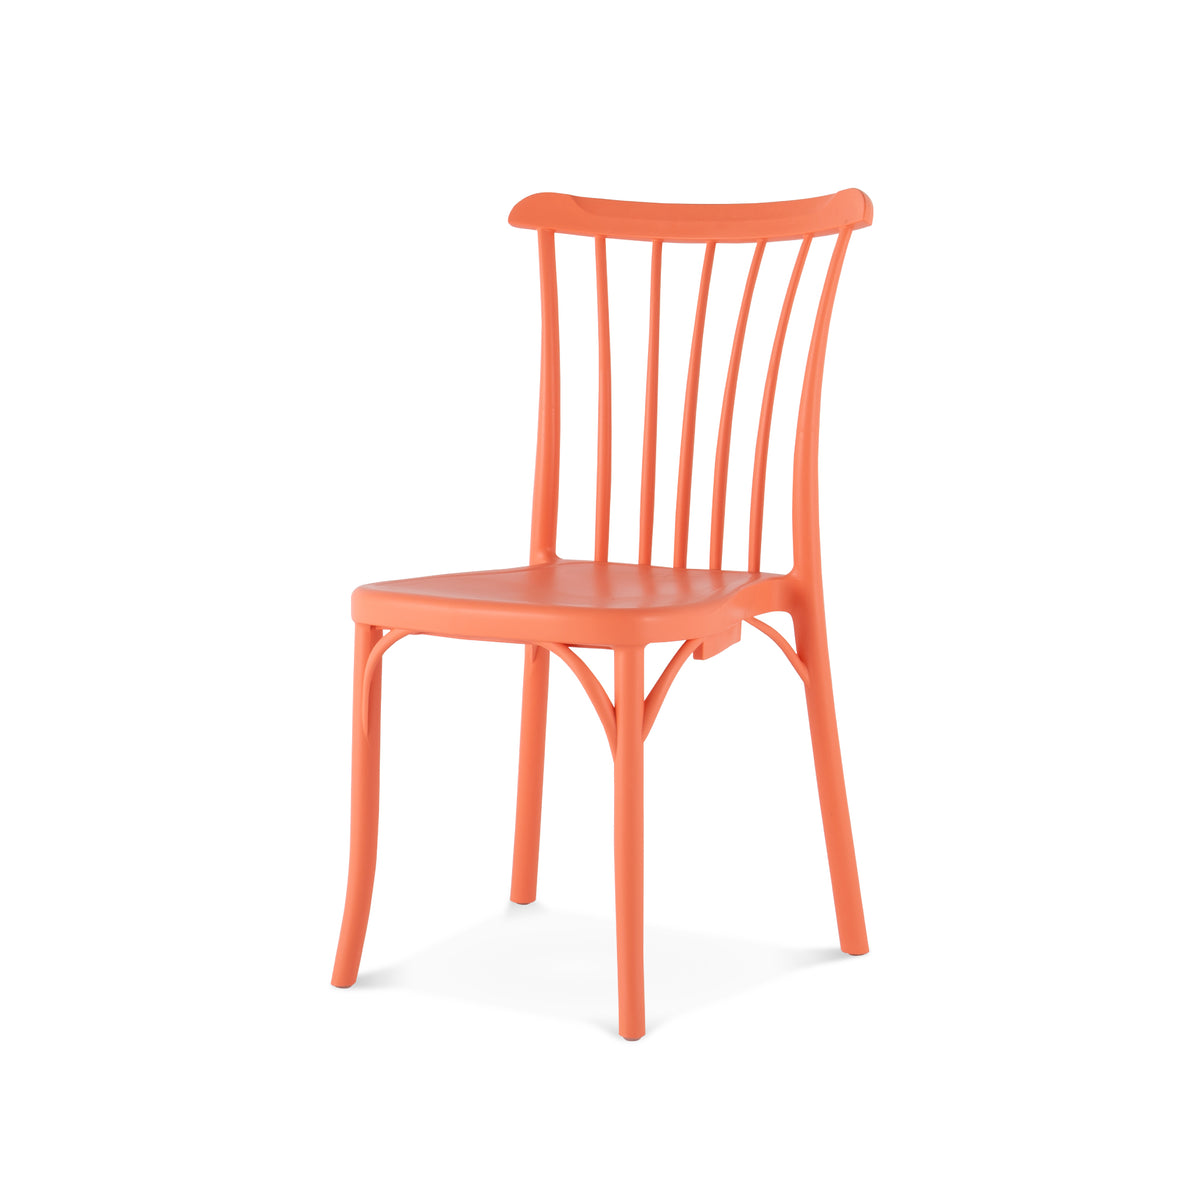 Toppy Stackable RIO DINNING CHAIR , 2 pcs / set.